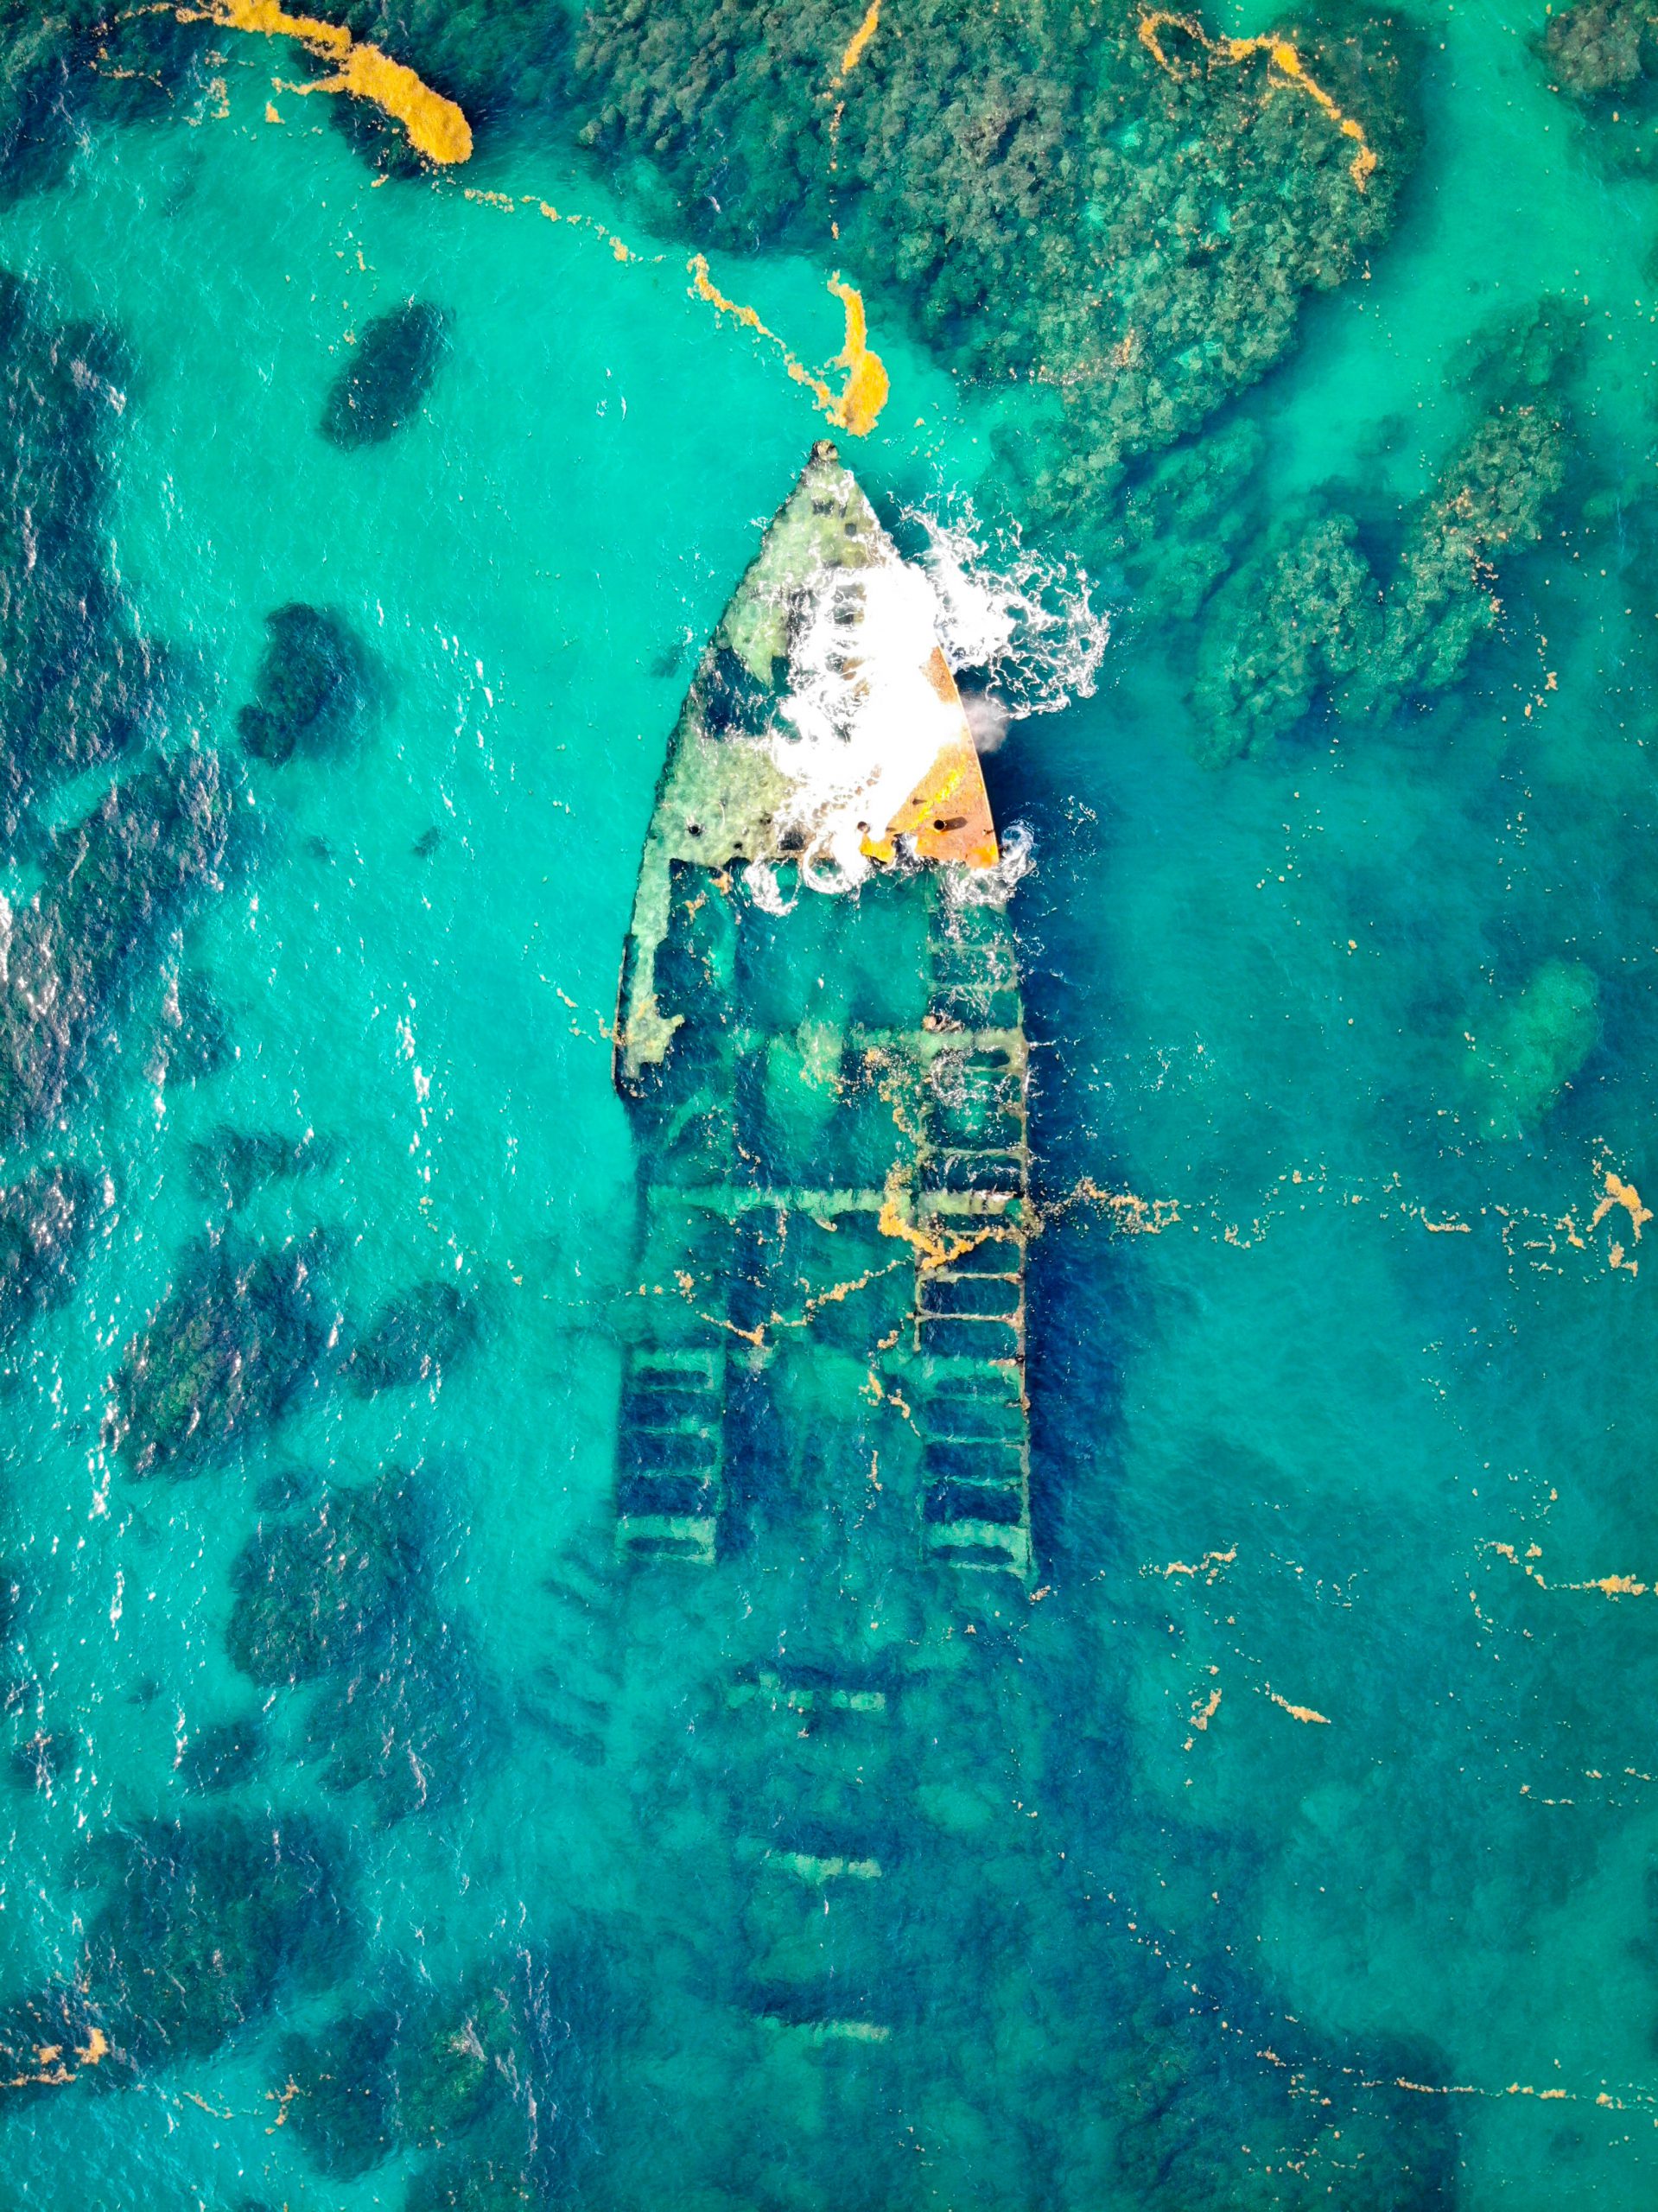 aerial-view-of-a-ship-wreck-on-body-of-water-3675390